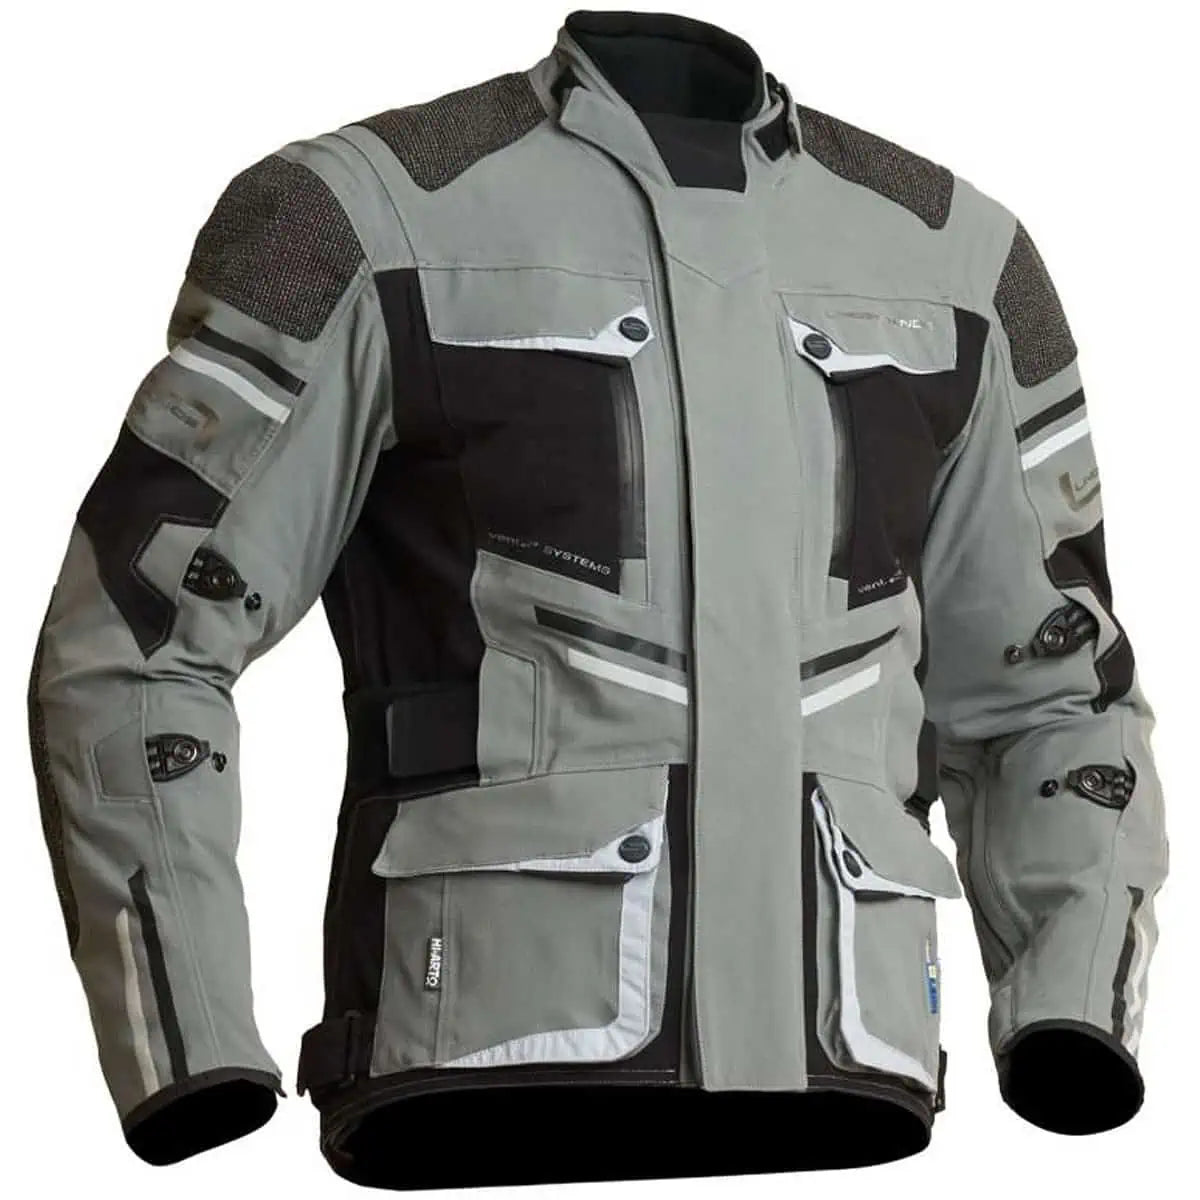 The Lindstrands Sunne: A Touring Jacket with the Benefits of Laminate Waterproofing